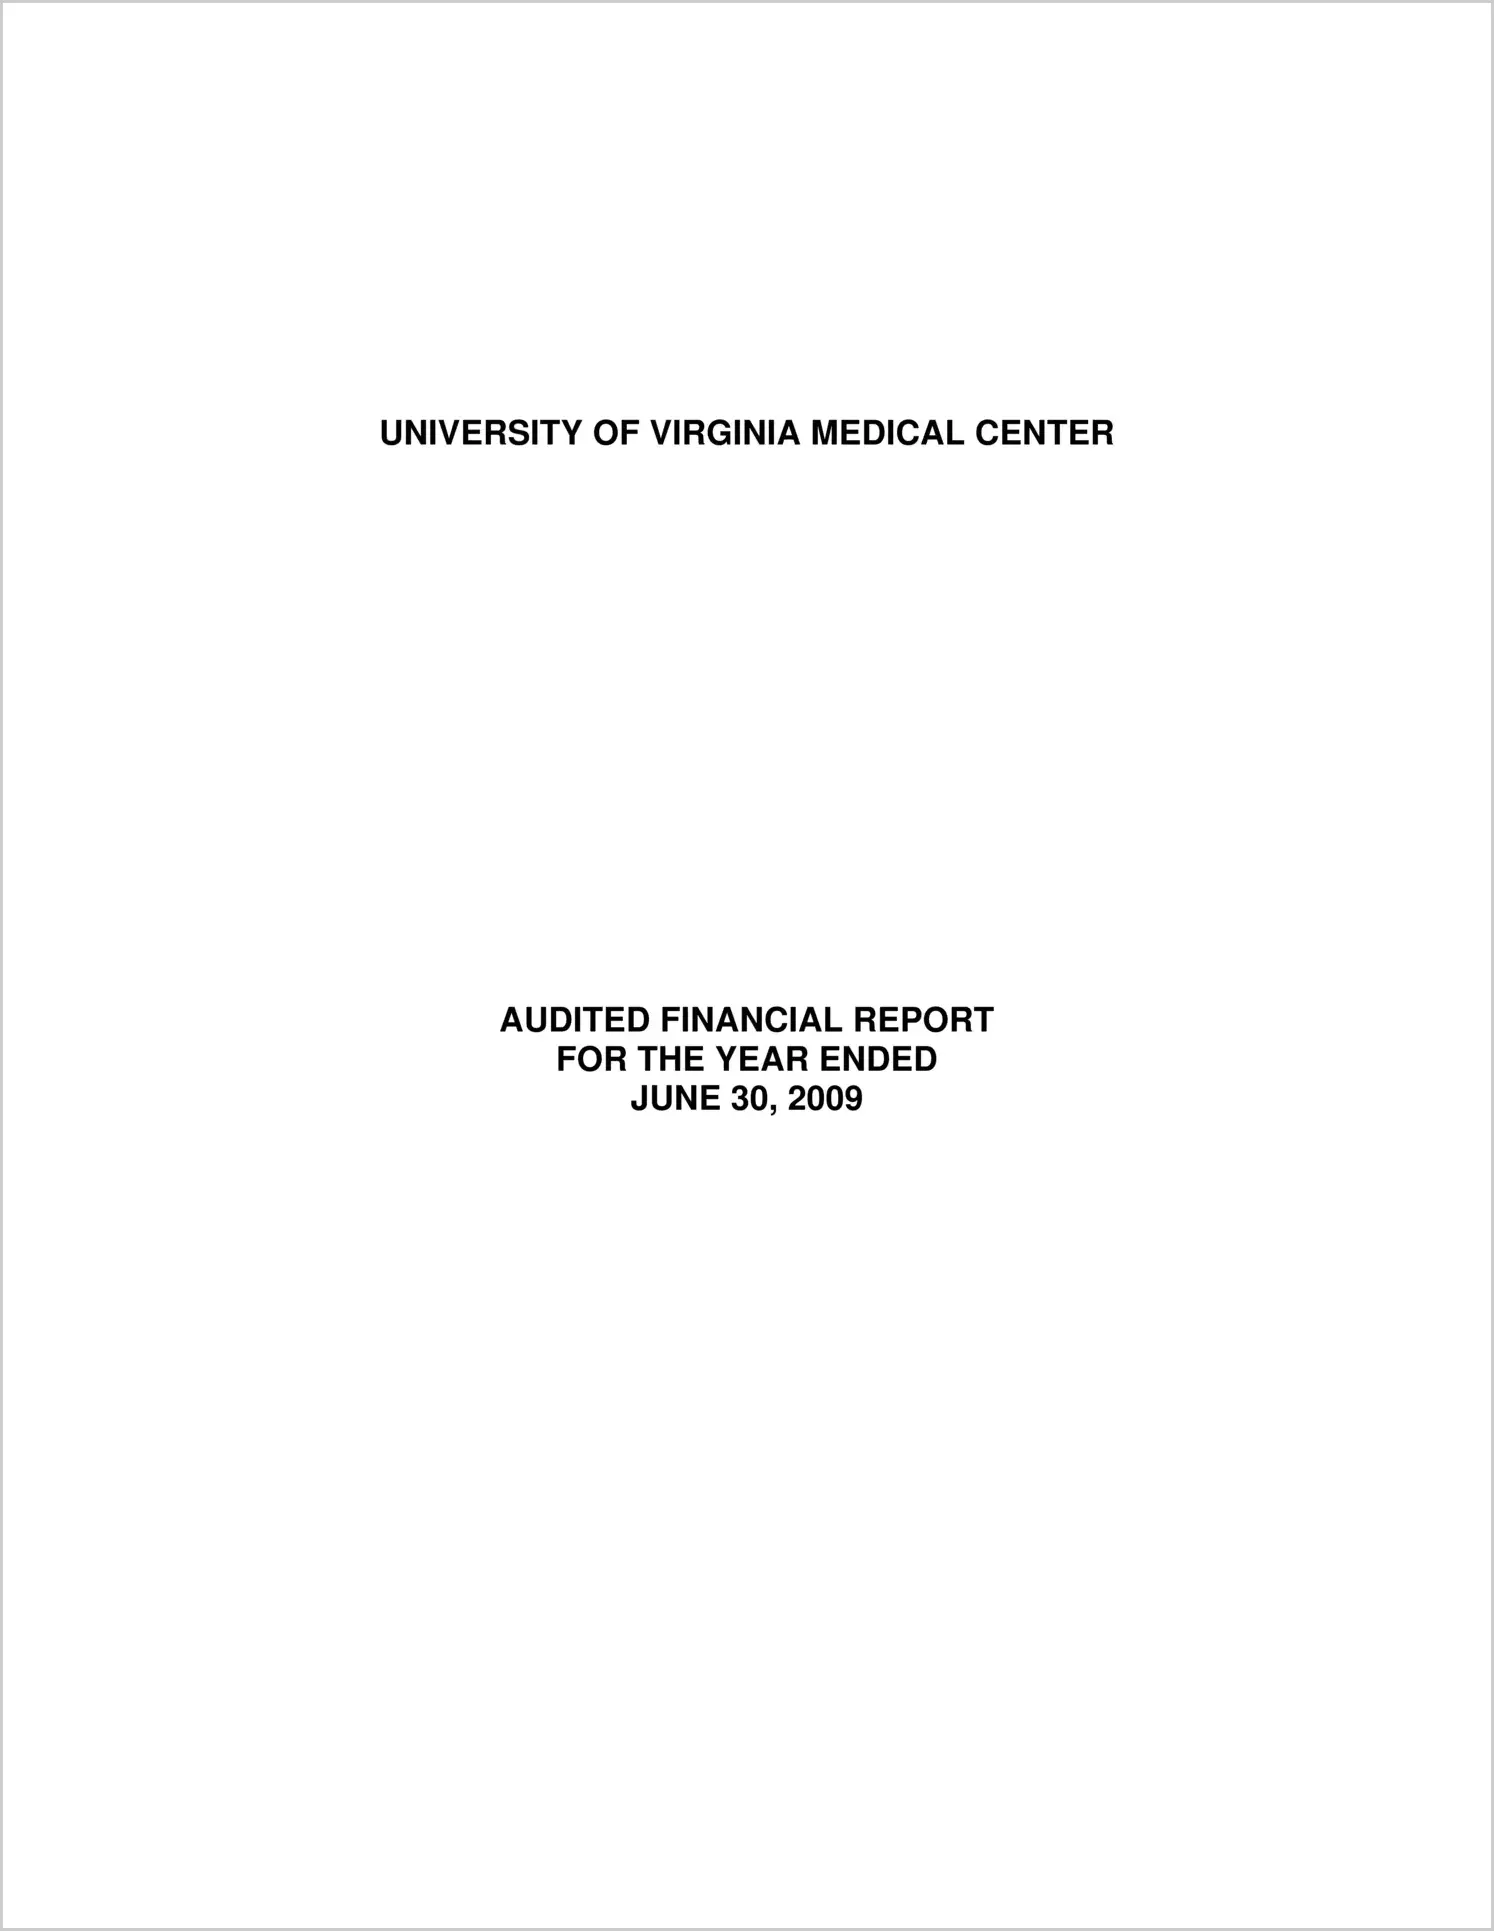 University of Virginia Medical Center Finanical Report for the year ended June 30, 2009